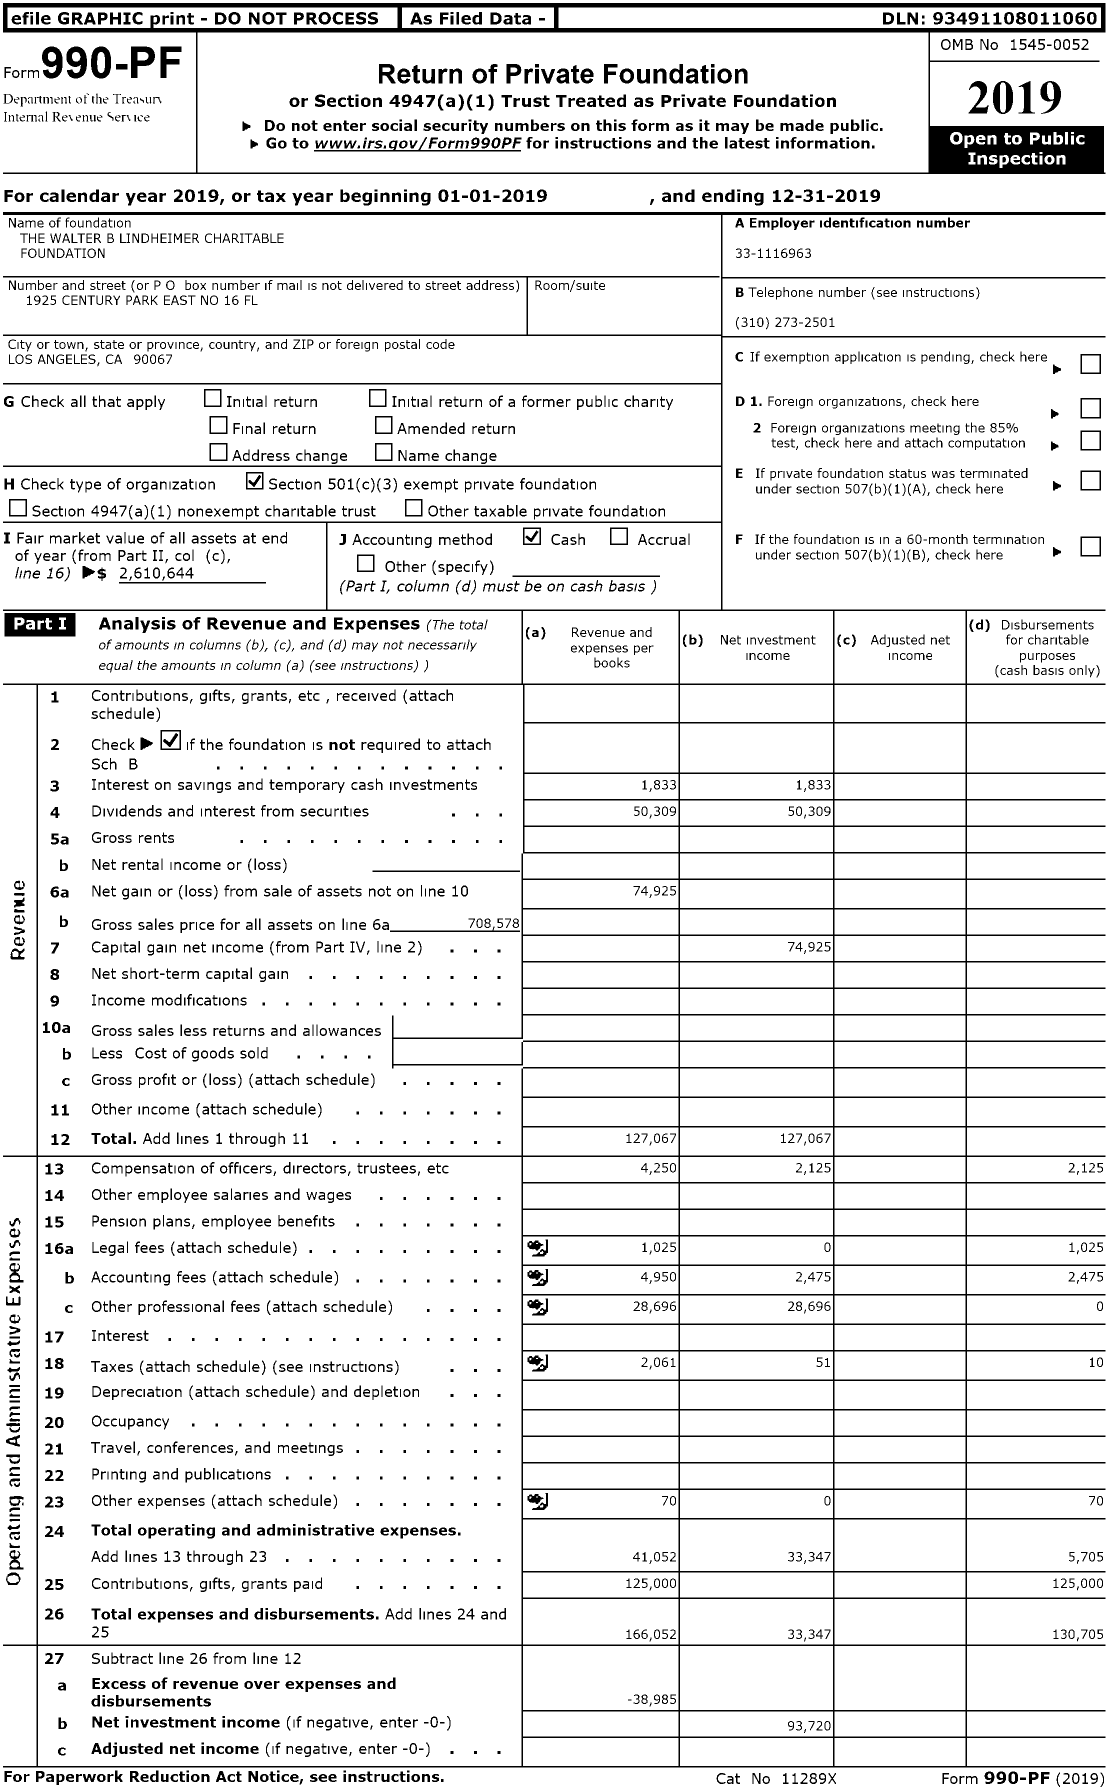 Image of first page of 2019 Form 990PR for The Walter B Lindheimer Charitable FOUNDATION